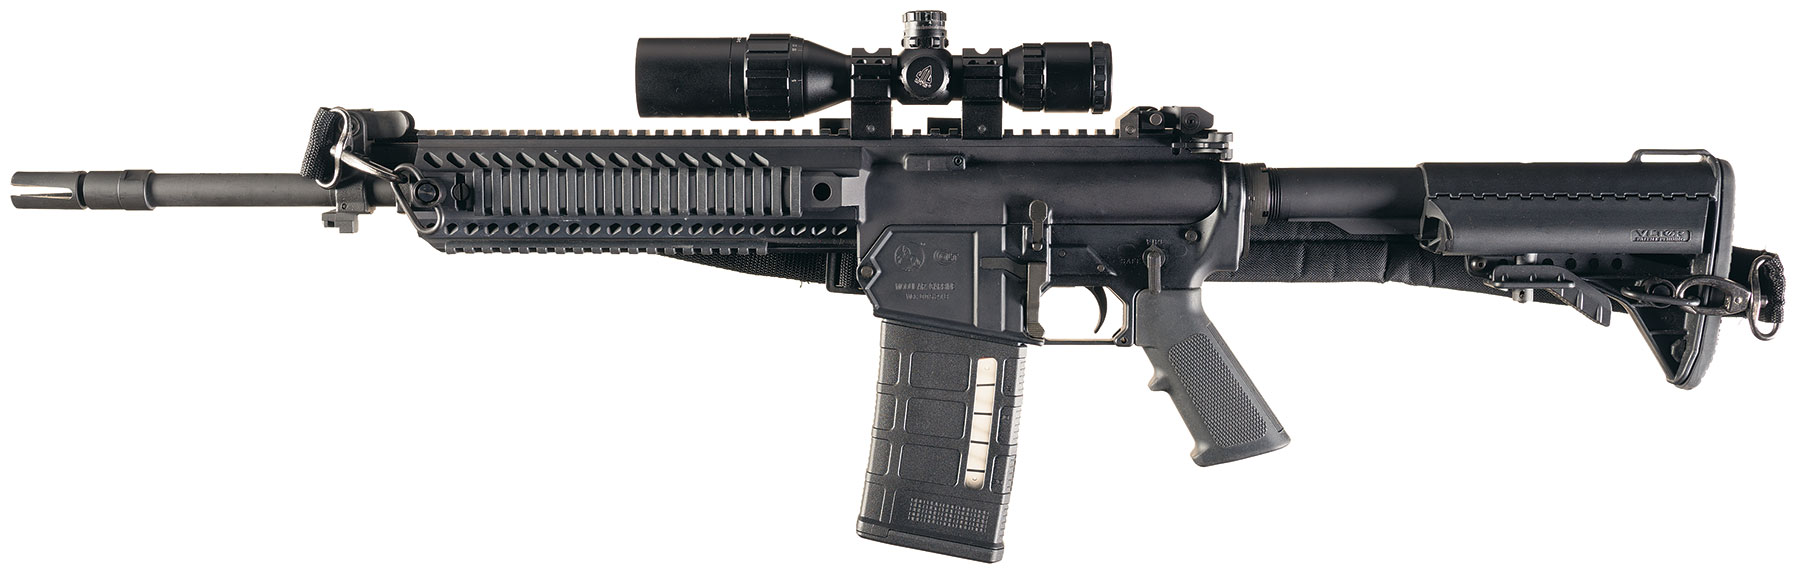 Colt LE901-16S Semi-Automatic Modular Carbine with Extra Magazines and Scop...